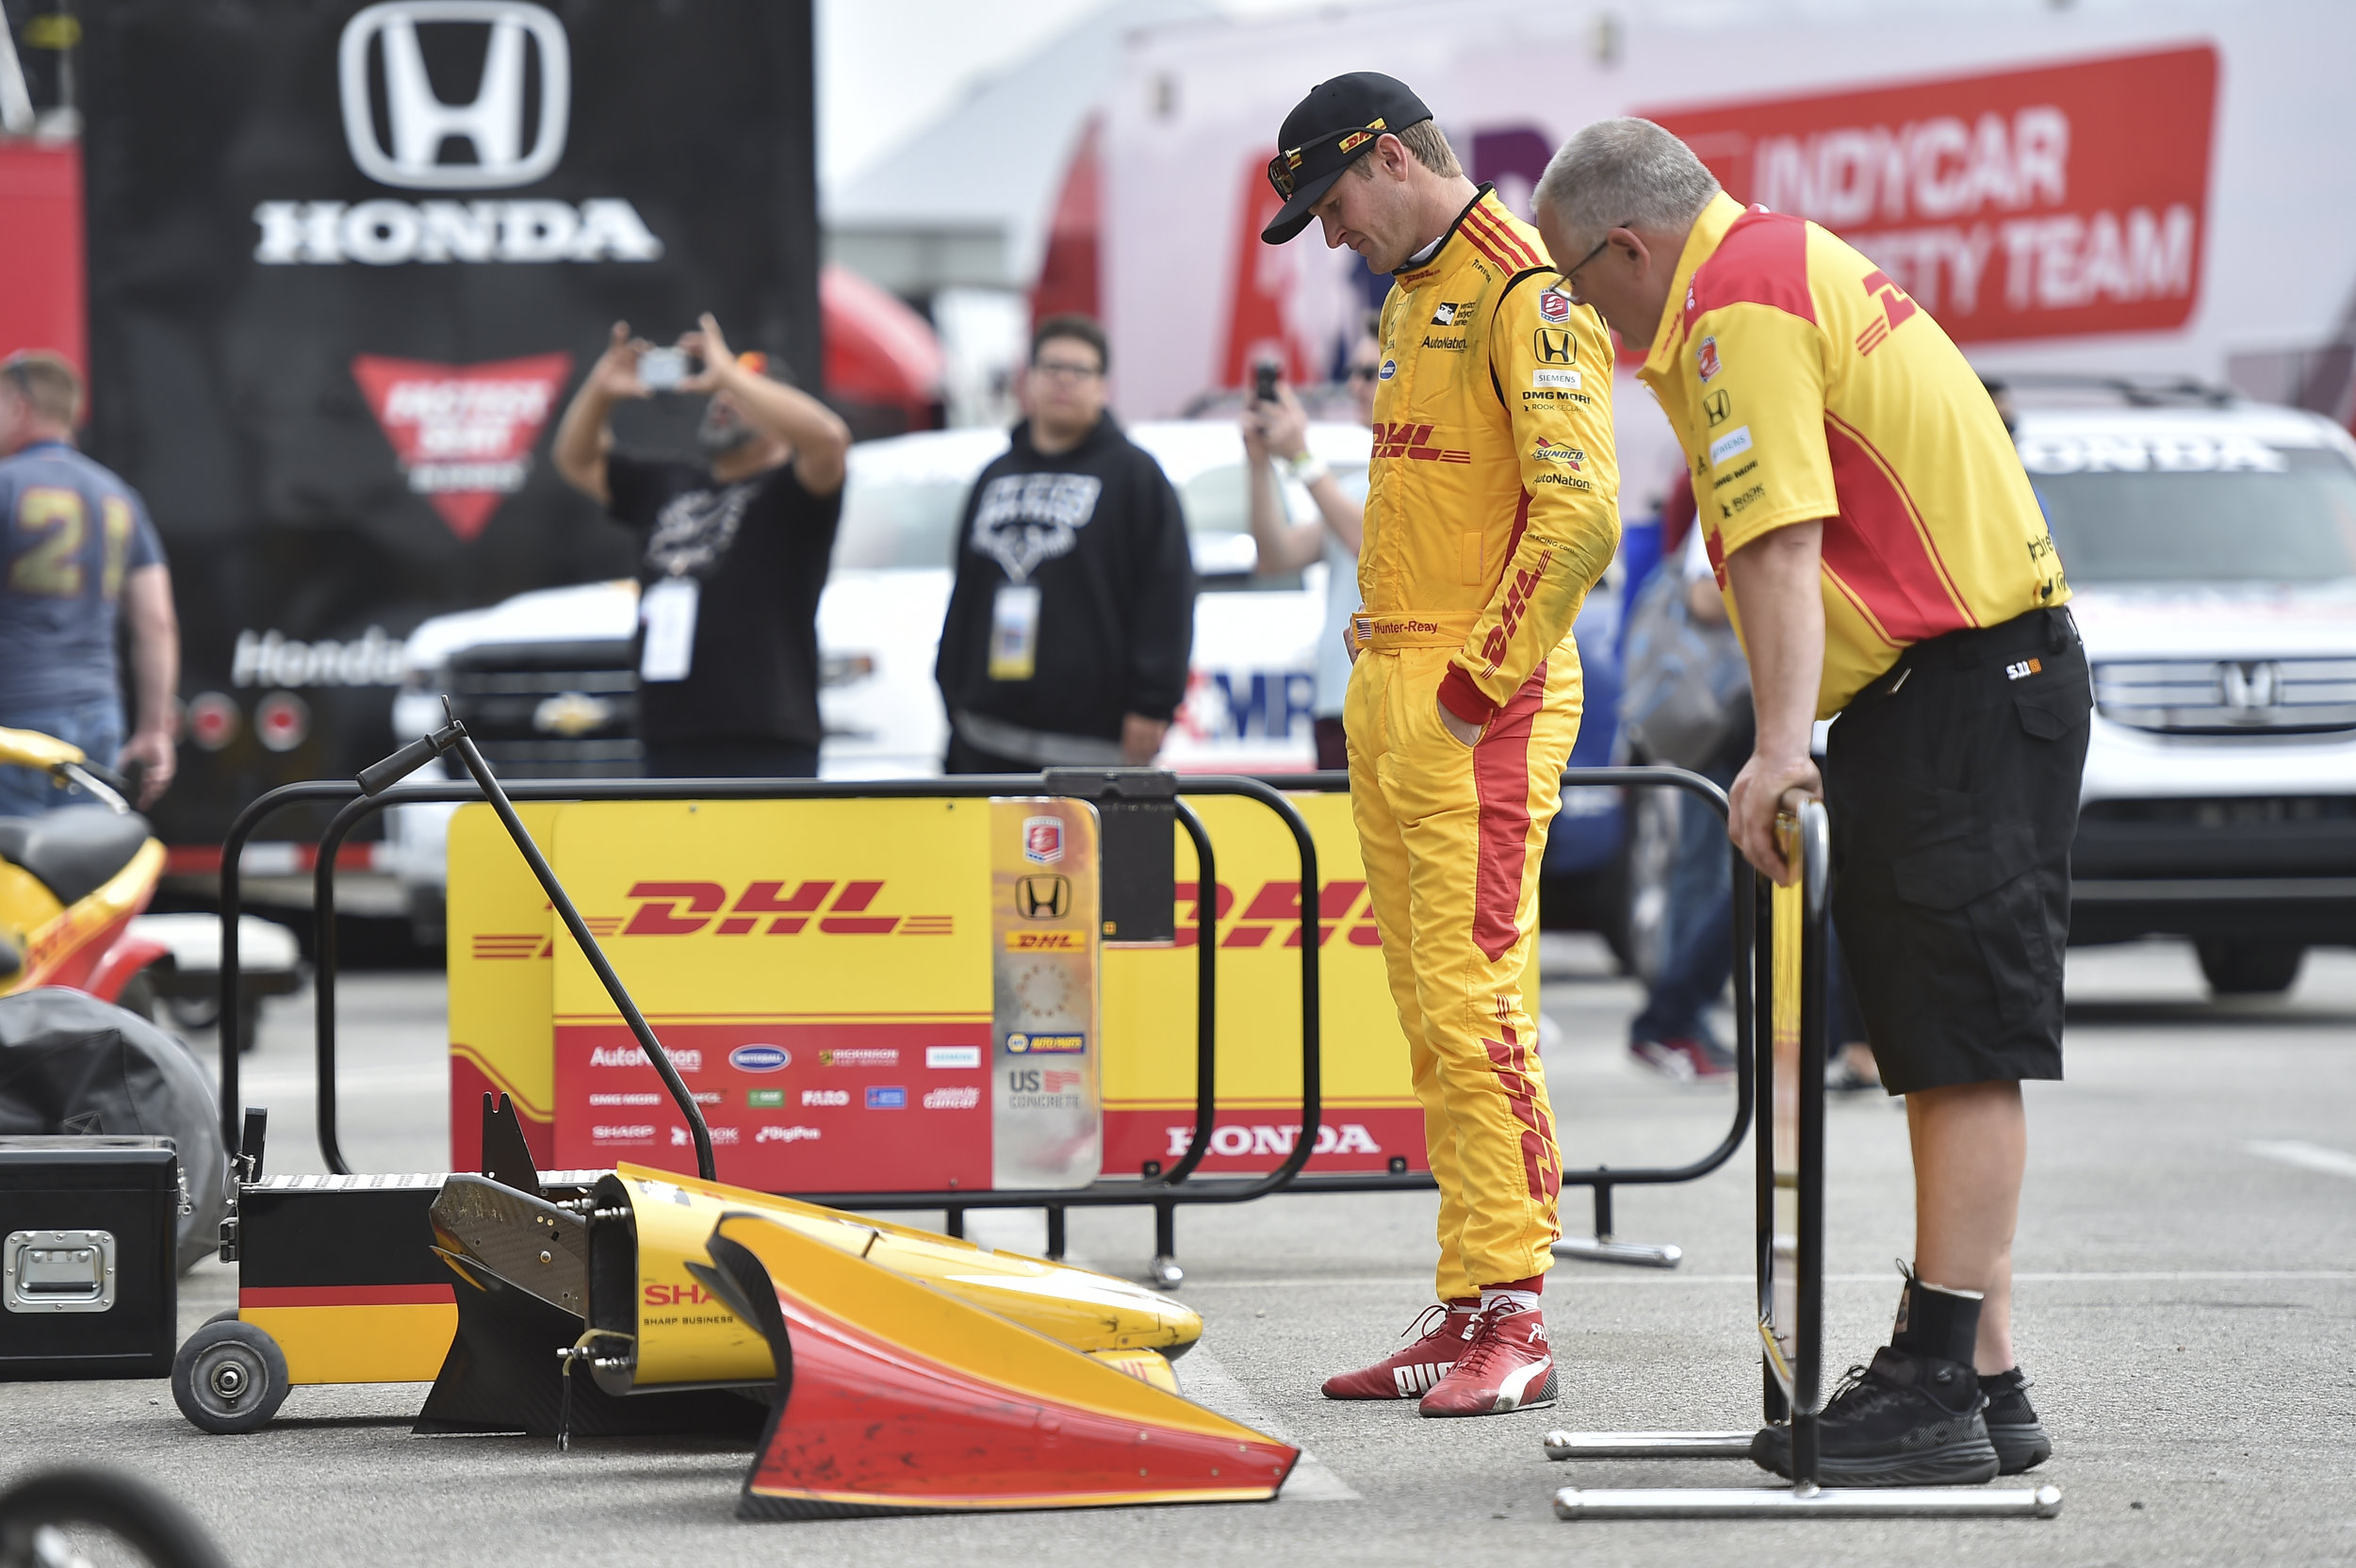  Ryan Hunter-Reay - Evaluates wing damage after the Long Beach Race  